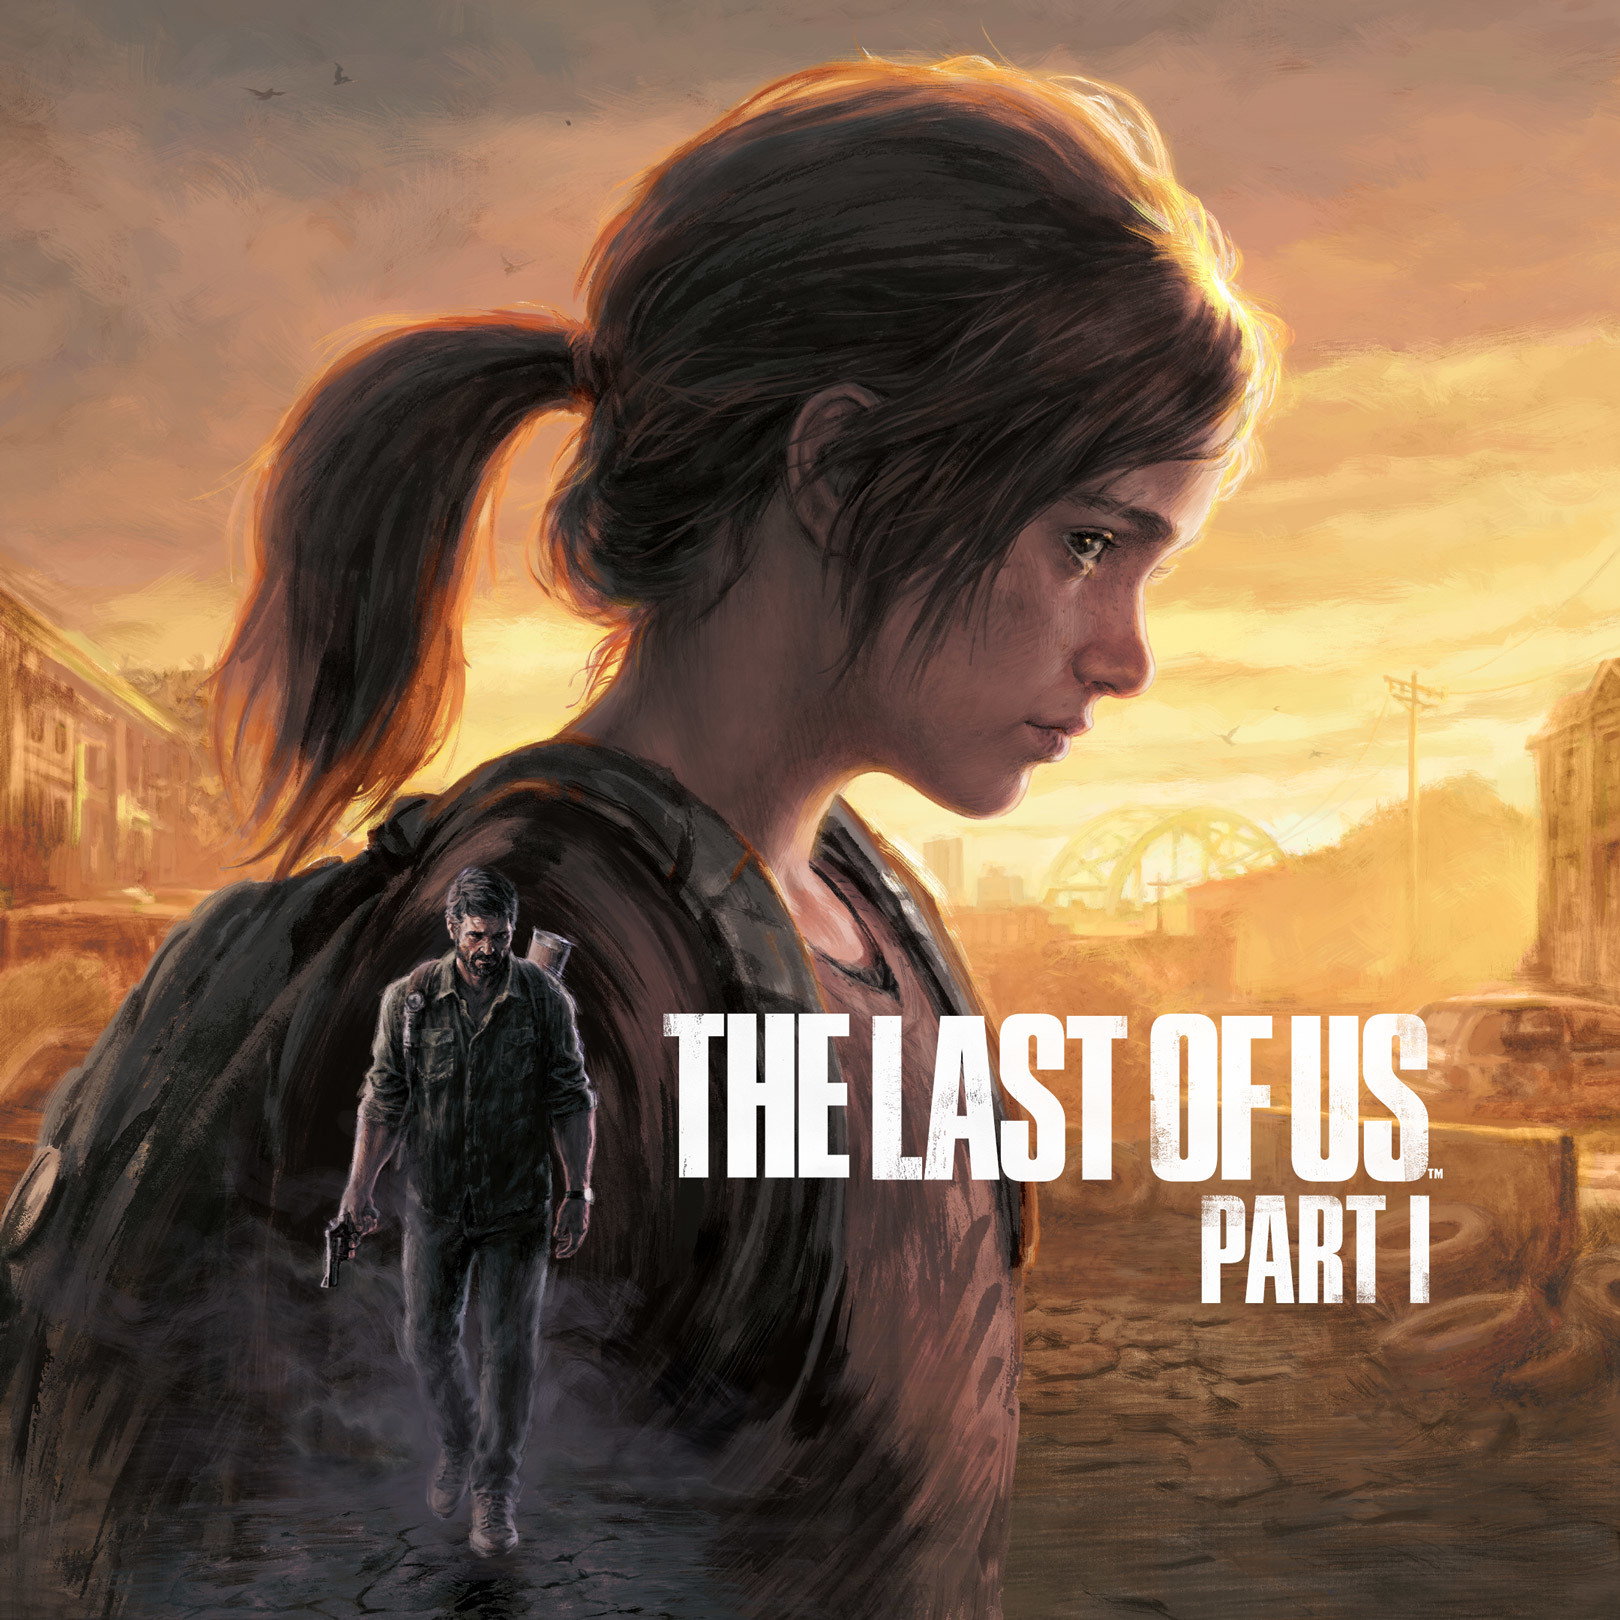 Optional Conversations - The Last of Us Part 1 Guide - IGN